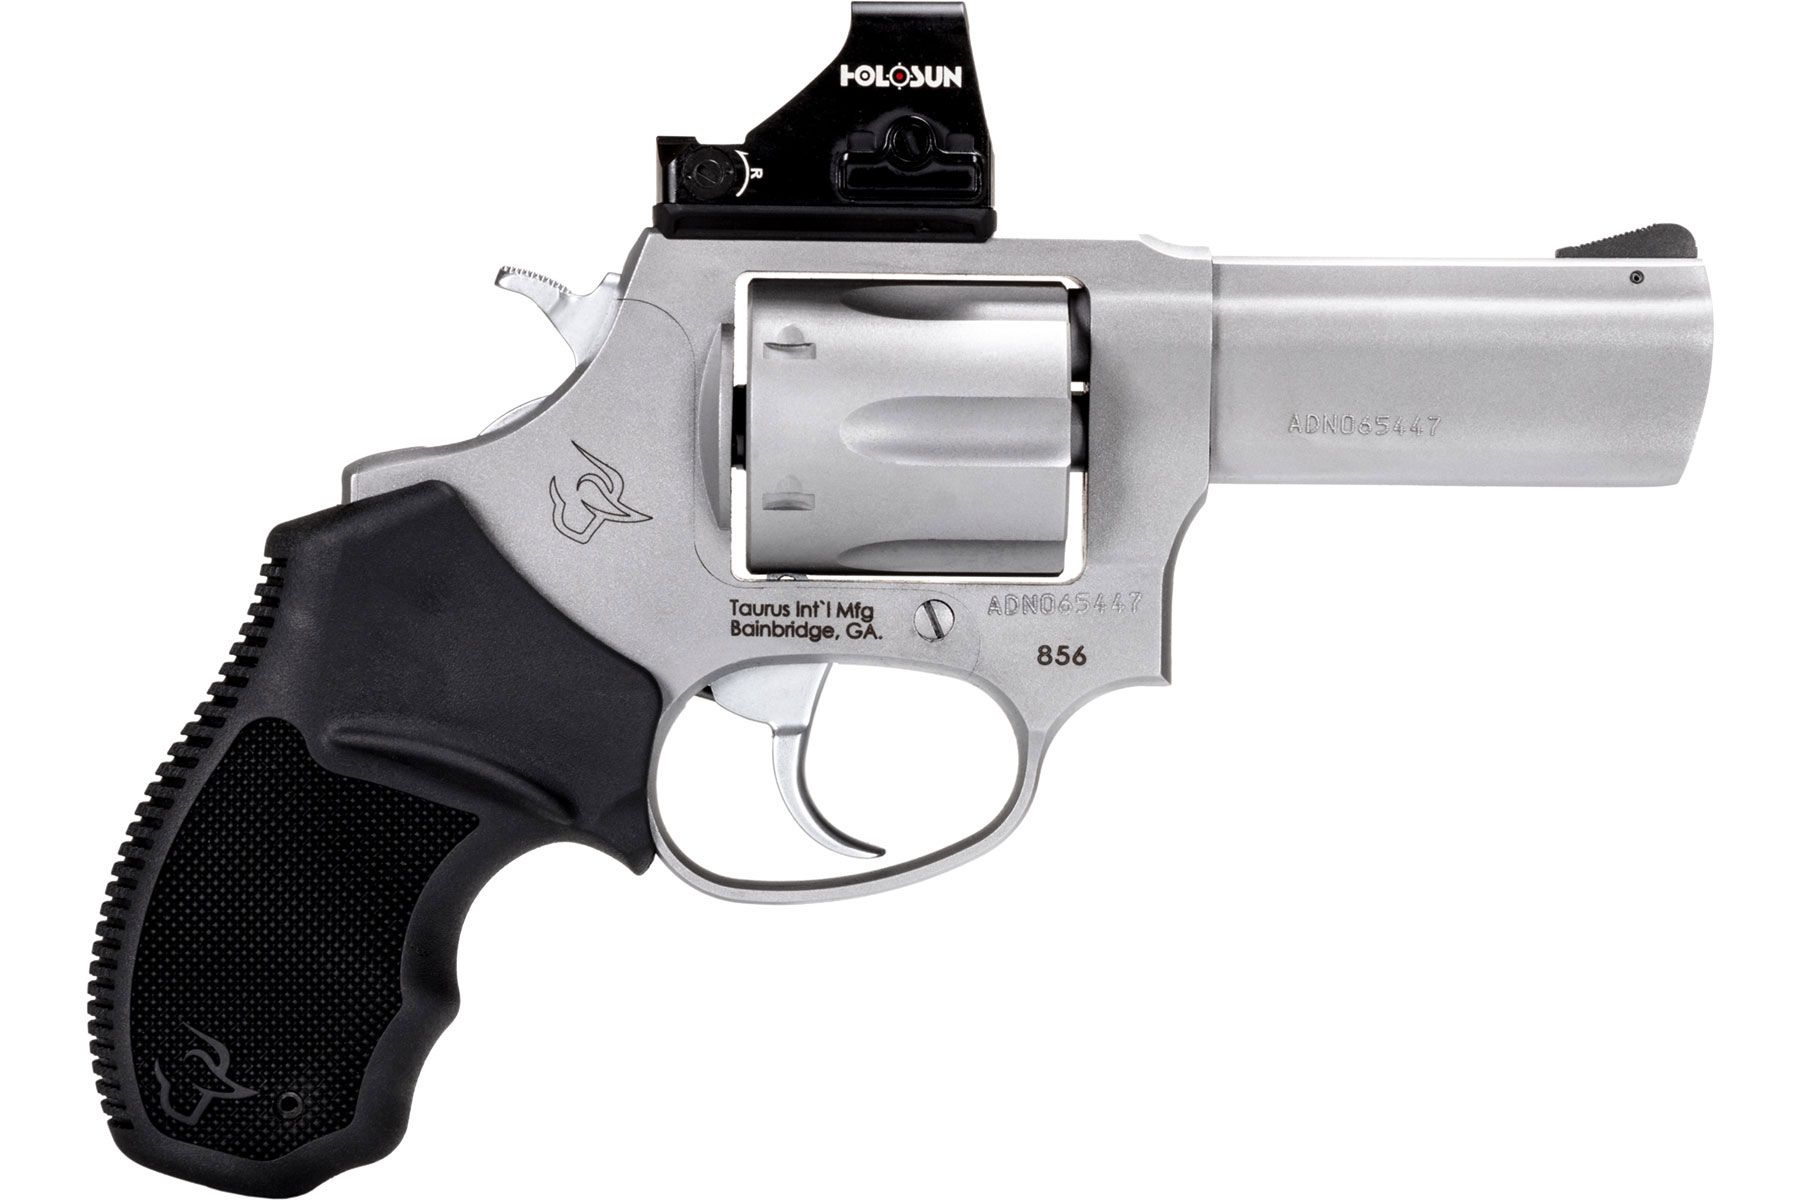 38 Spl +P Stainless Steel 3.00 in. First Ever Optics Ready Revolver